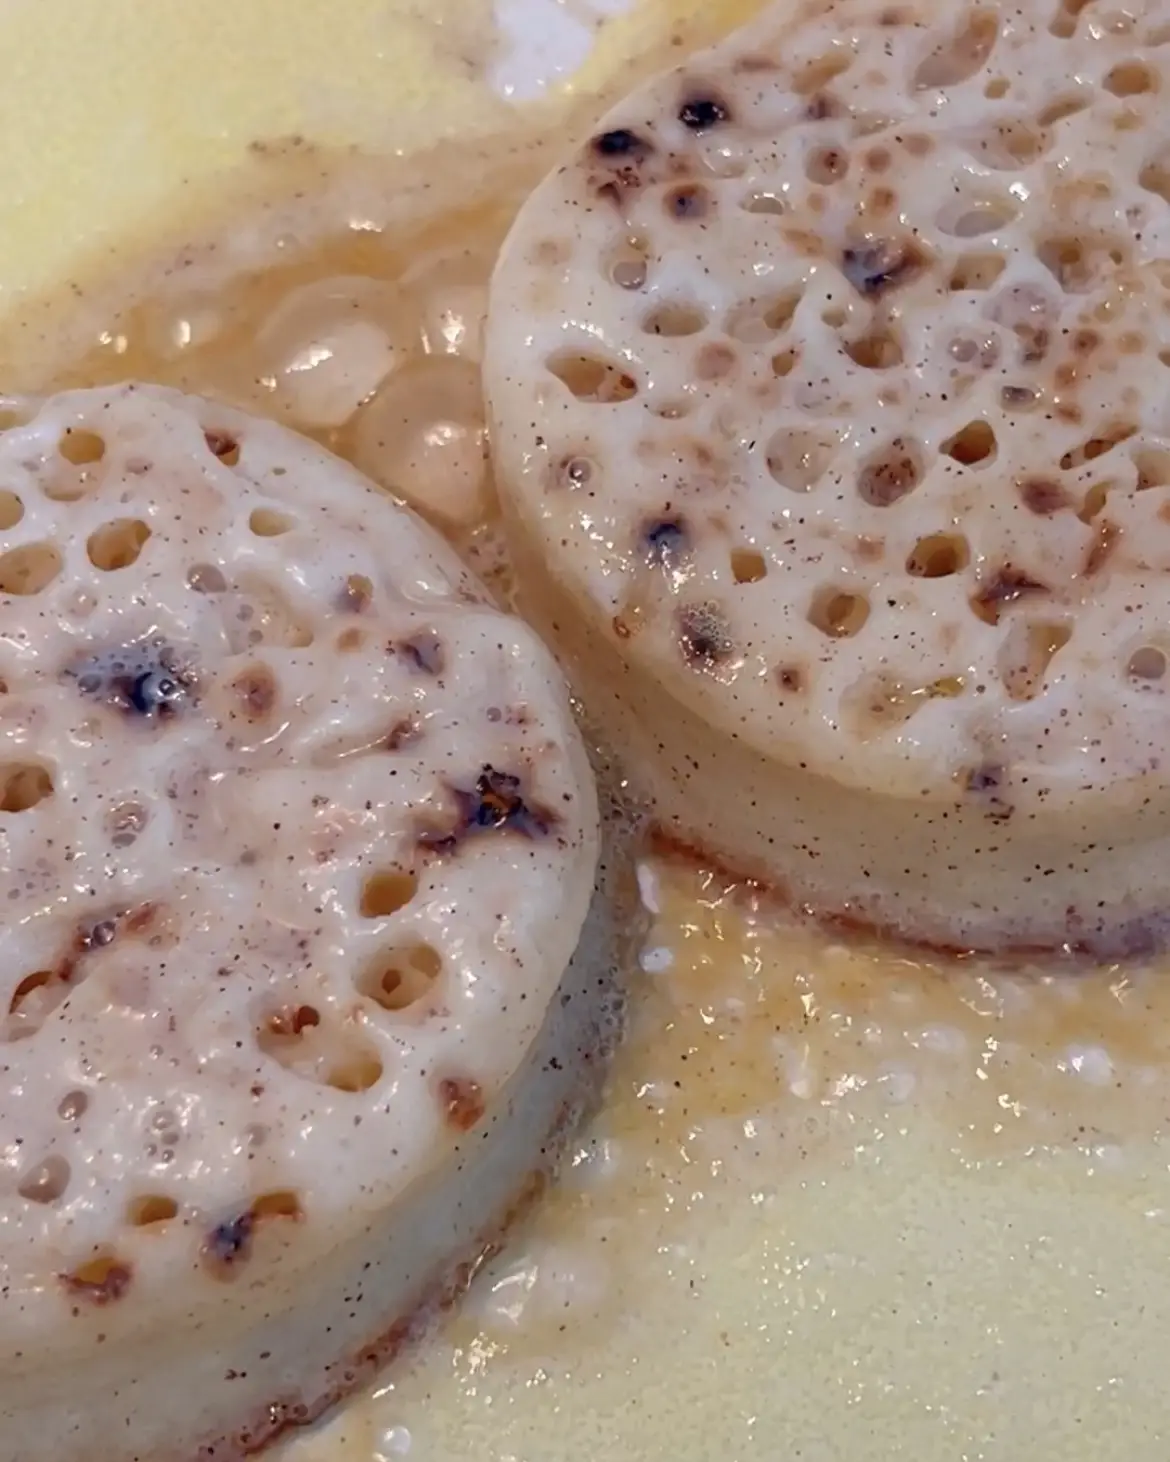 fry the crumpets